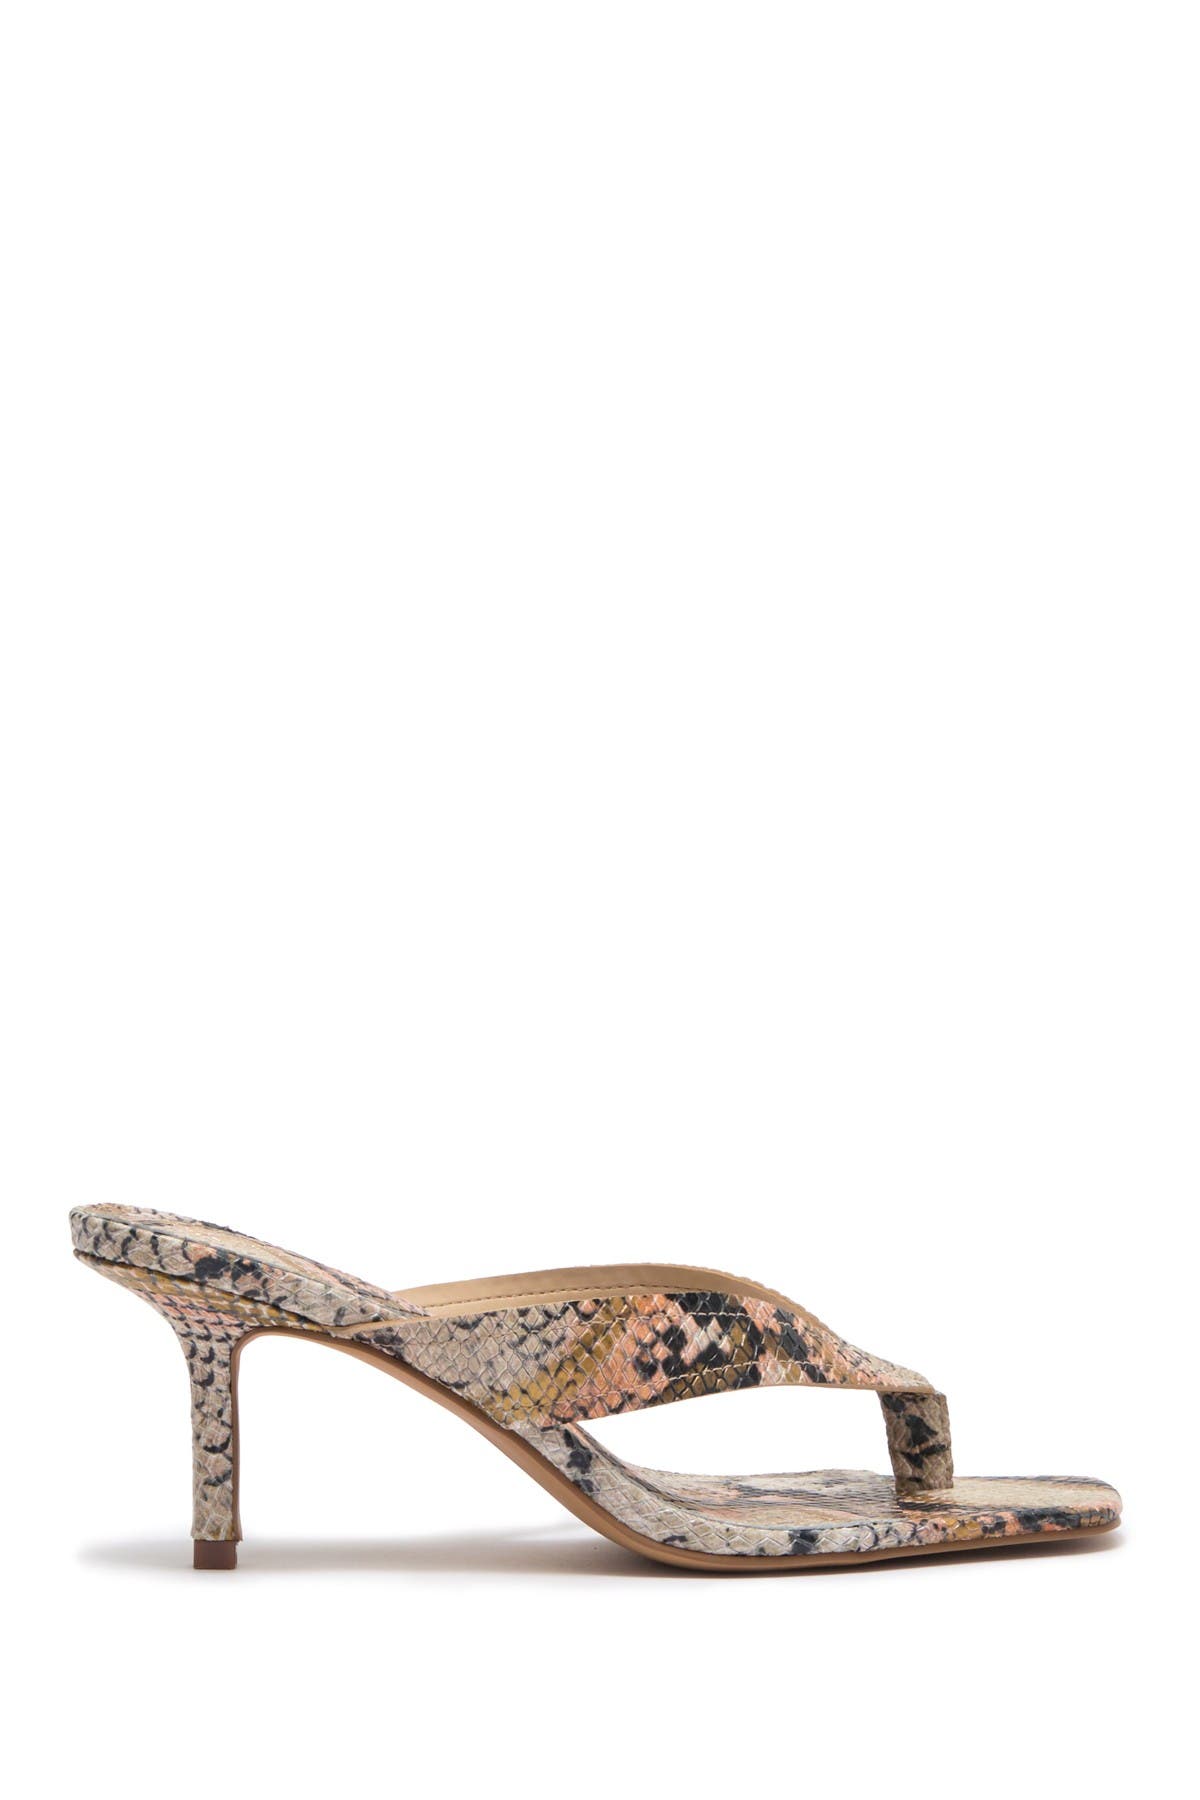 vince camuto thong sandals